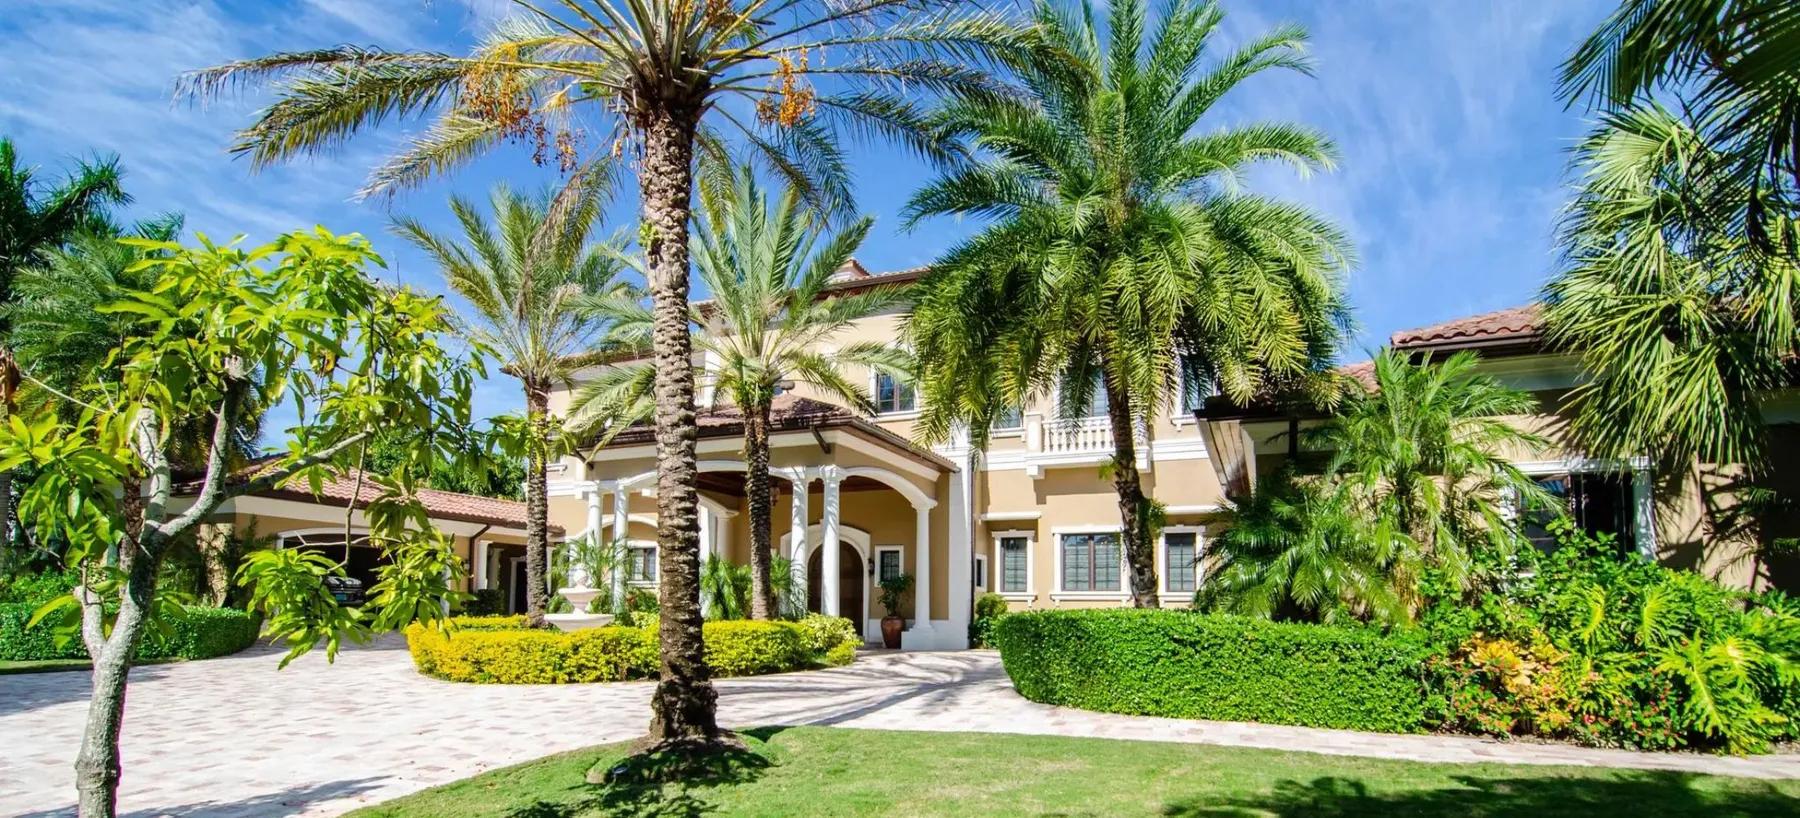 Find Luxury Real Estate in West Bay | Corcoran CA Christie Bahamas